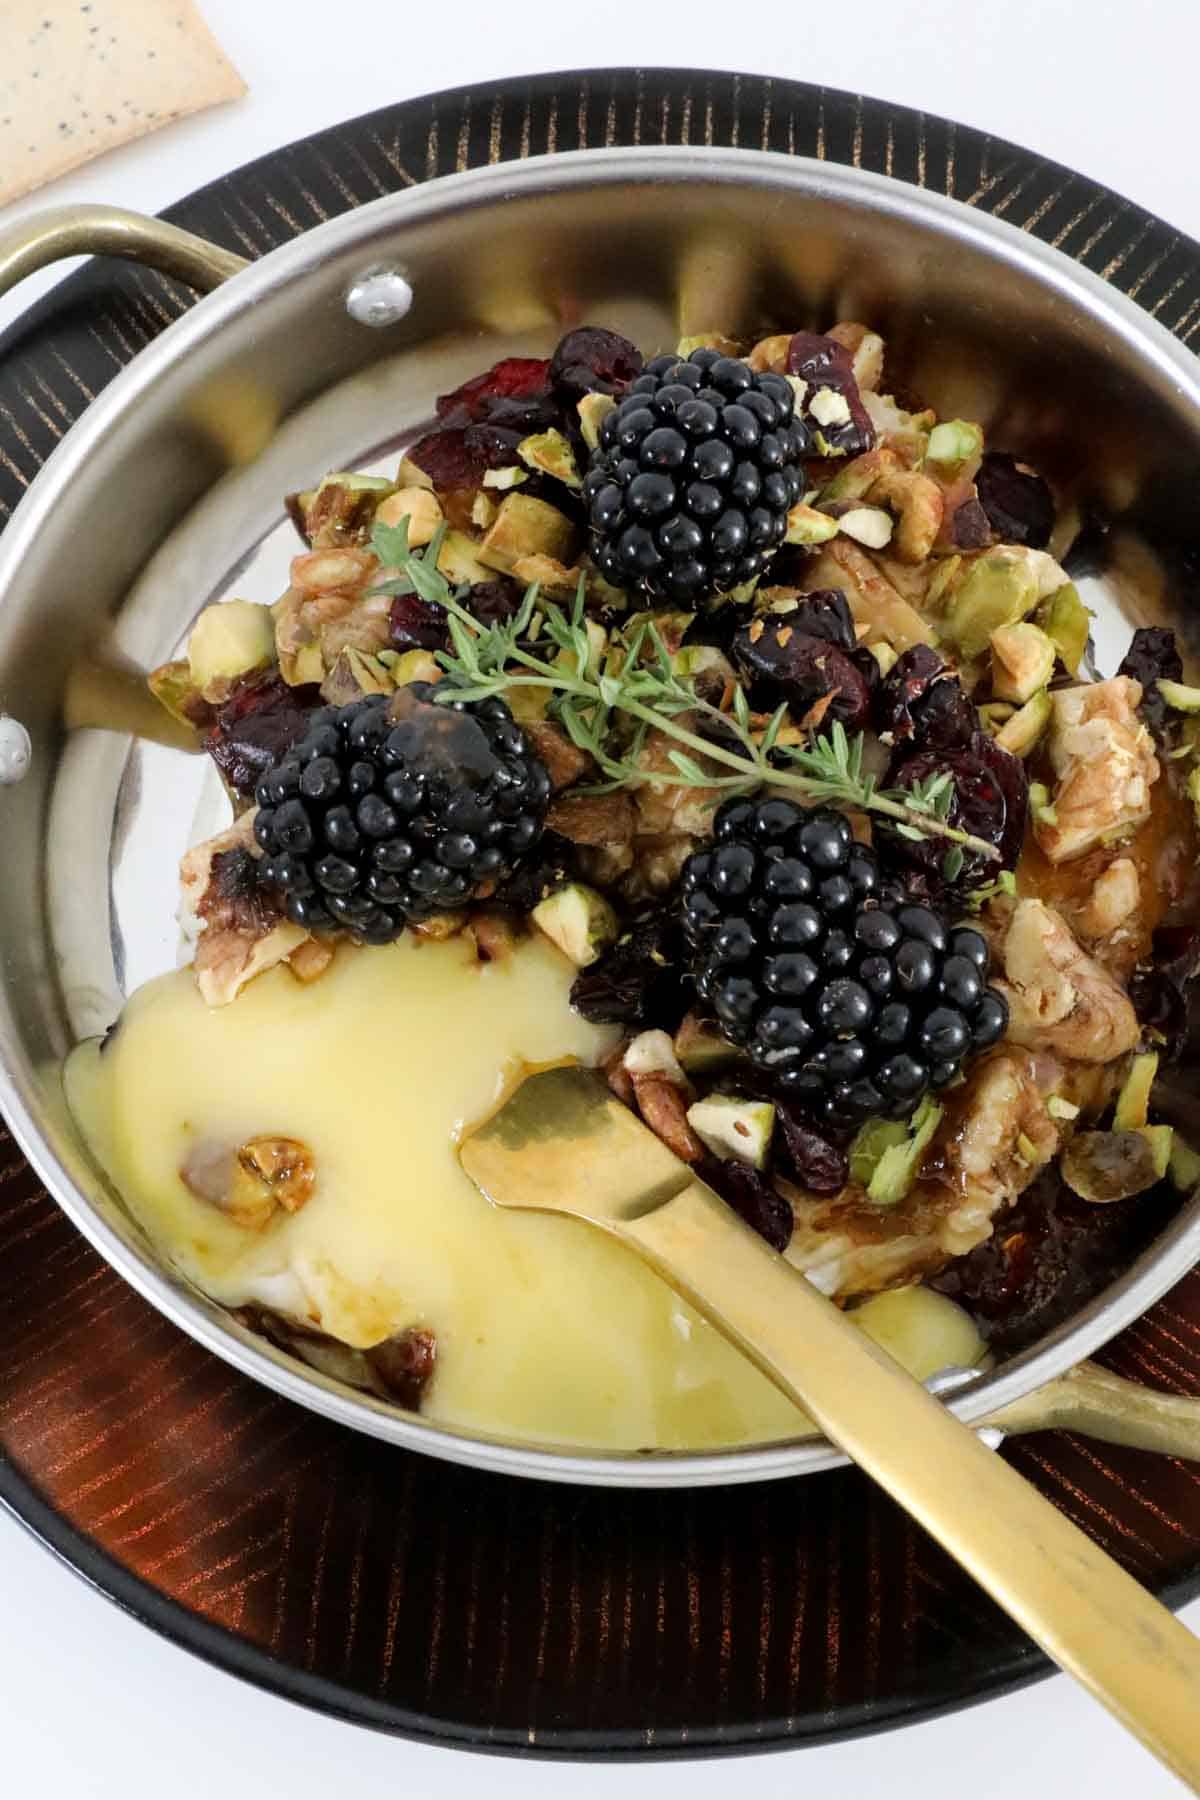 A melted baked cheese in a small round baking dish topped with nuts and fresh blackberries.